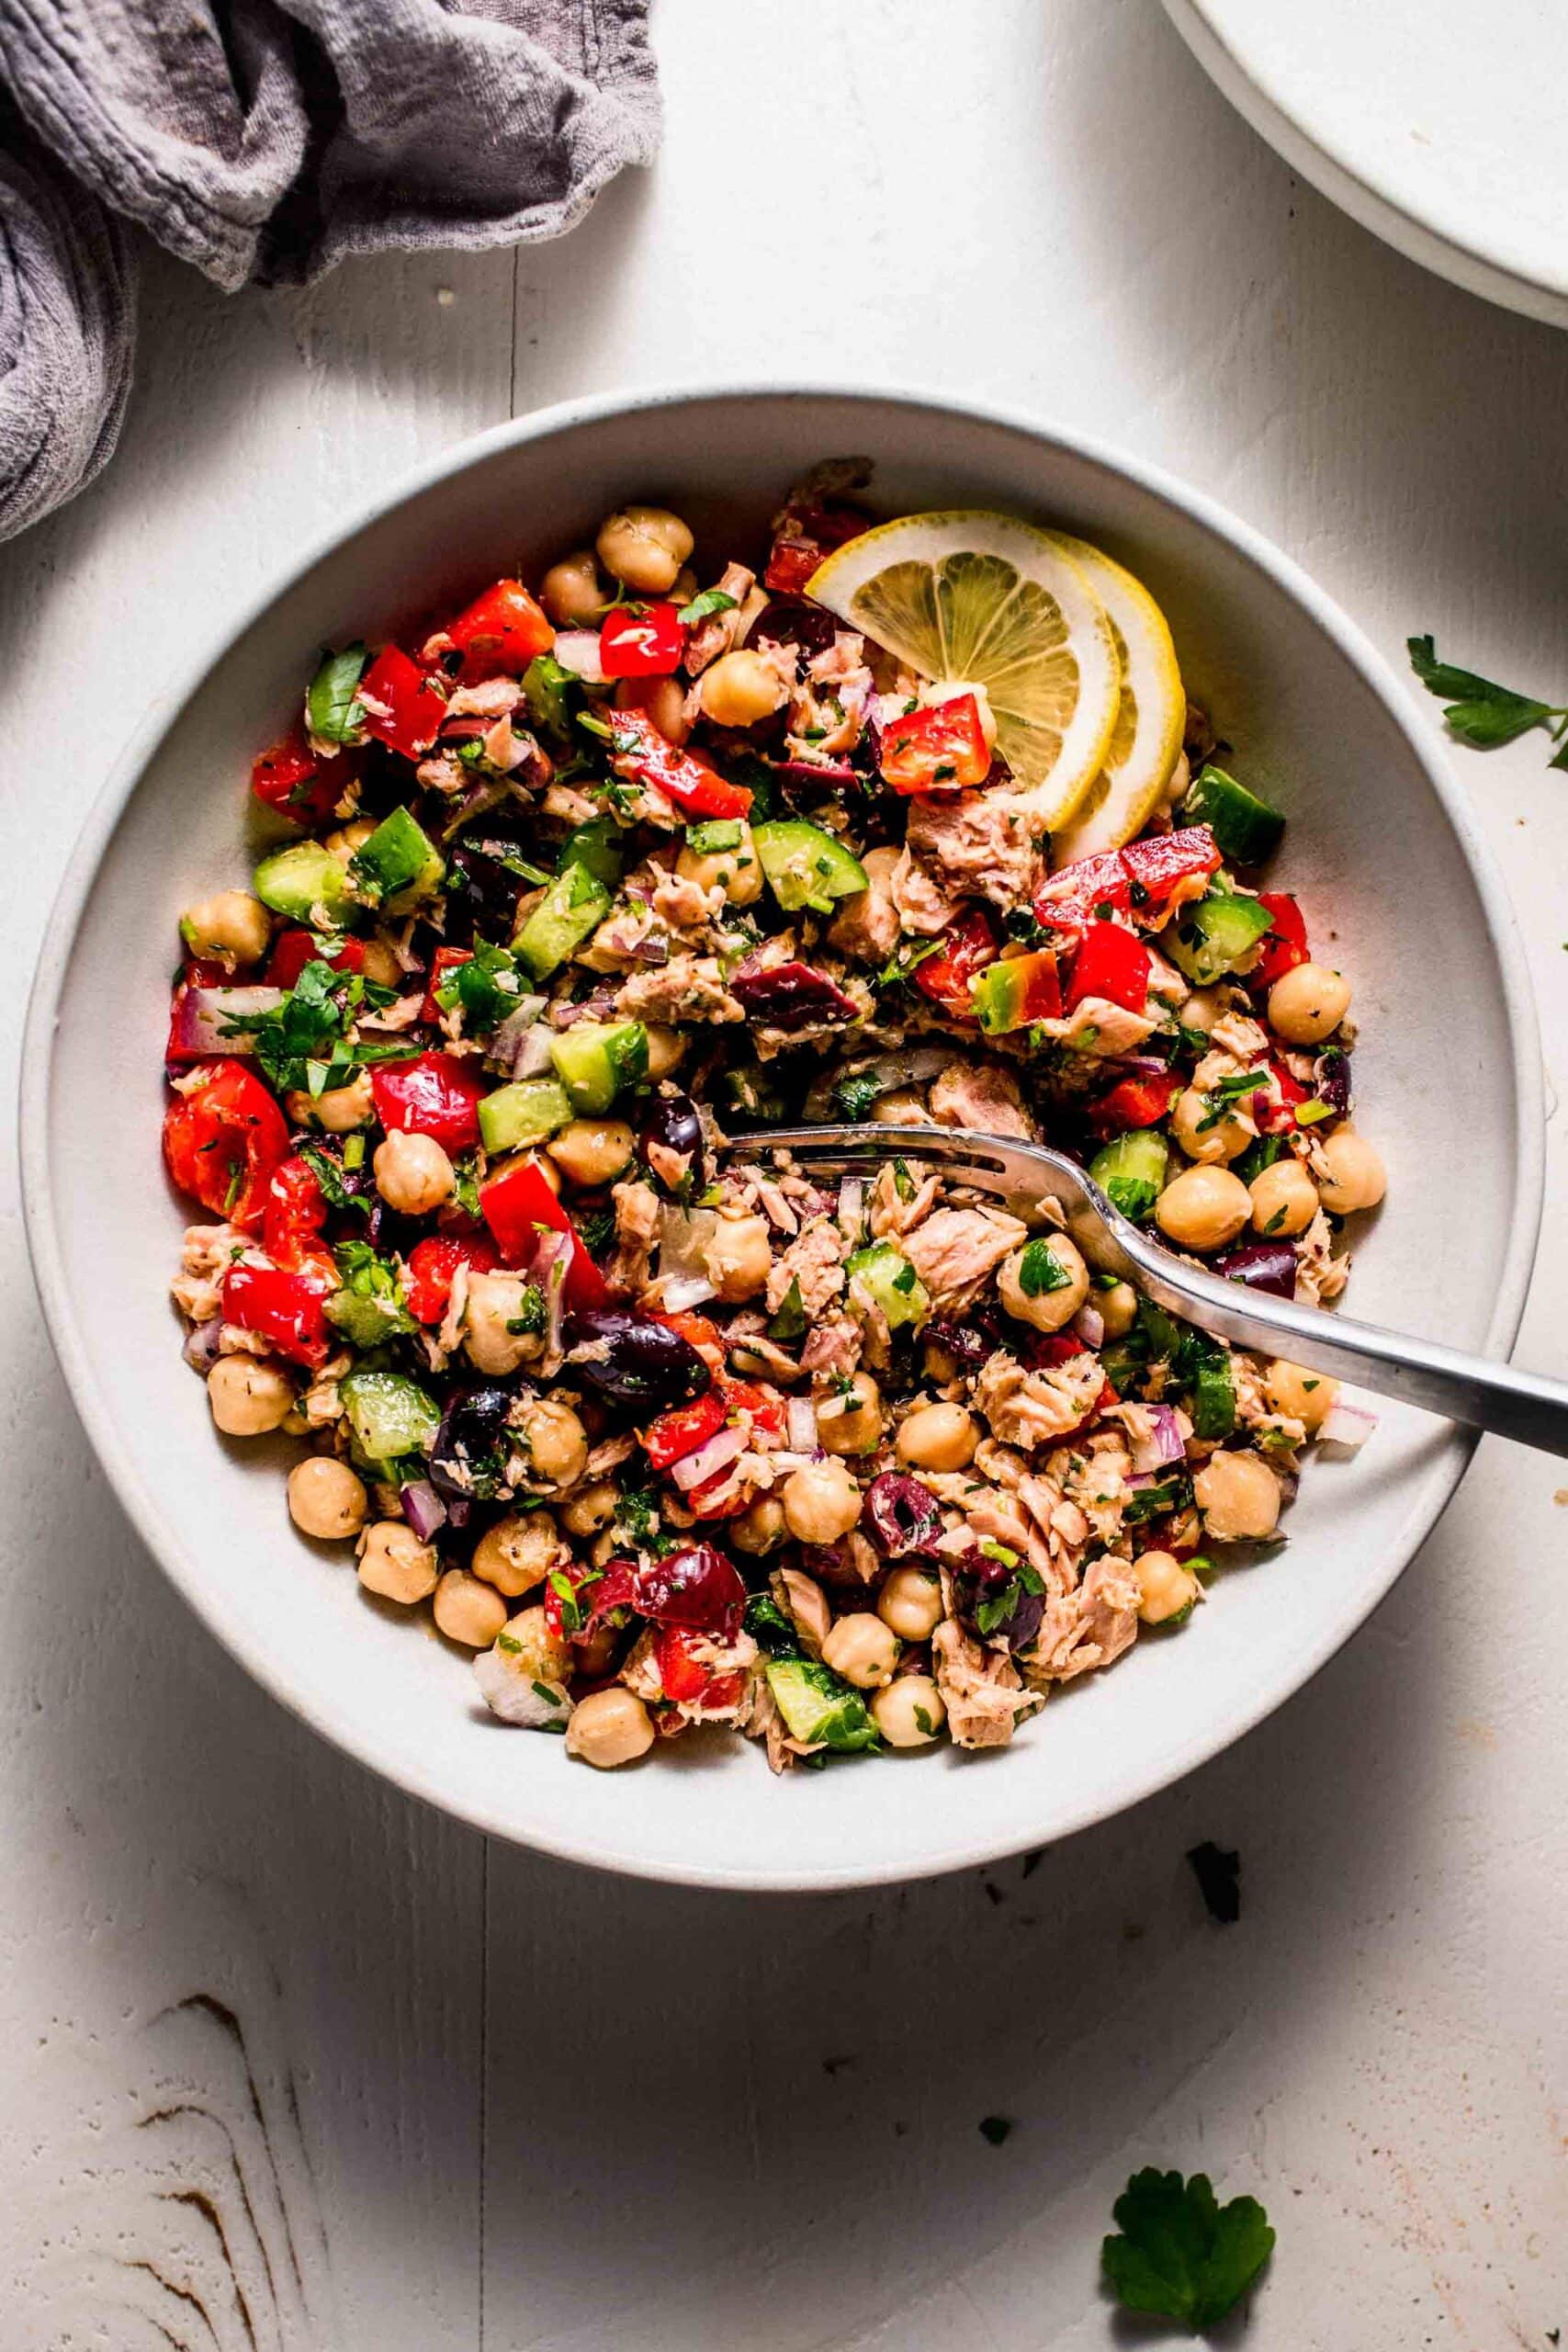 Tuna chickpea salad in bowl with lemon wedges and serving spoon.